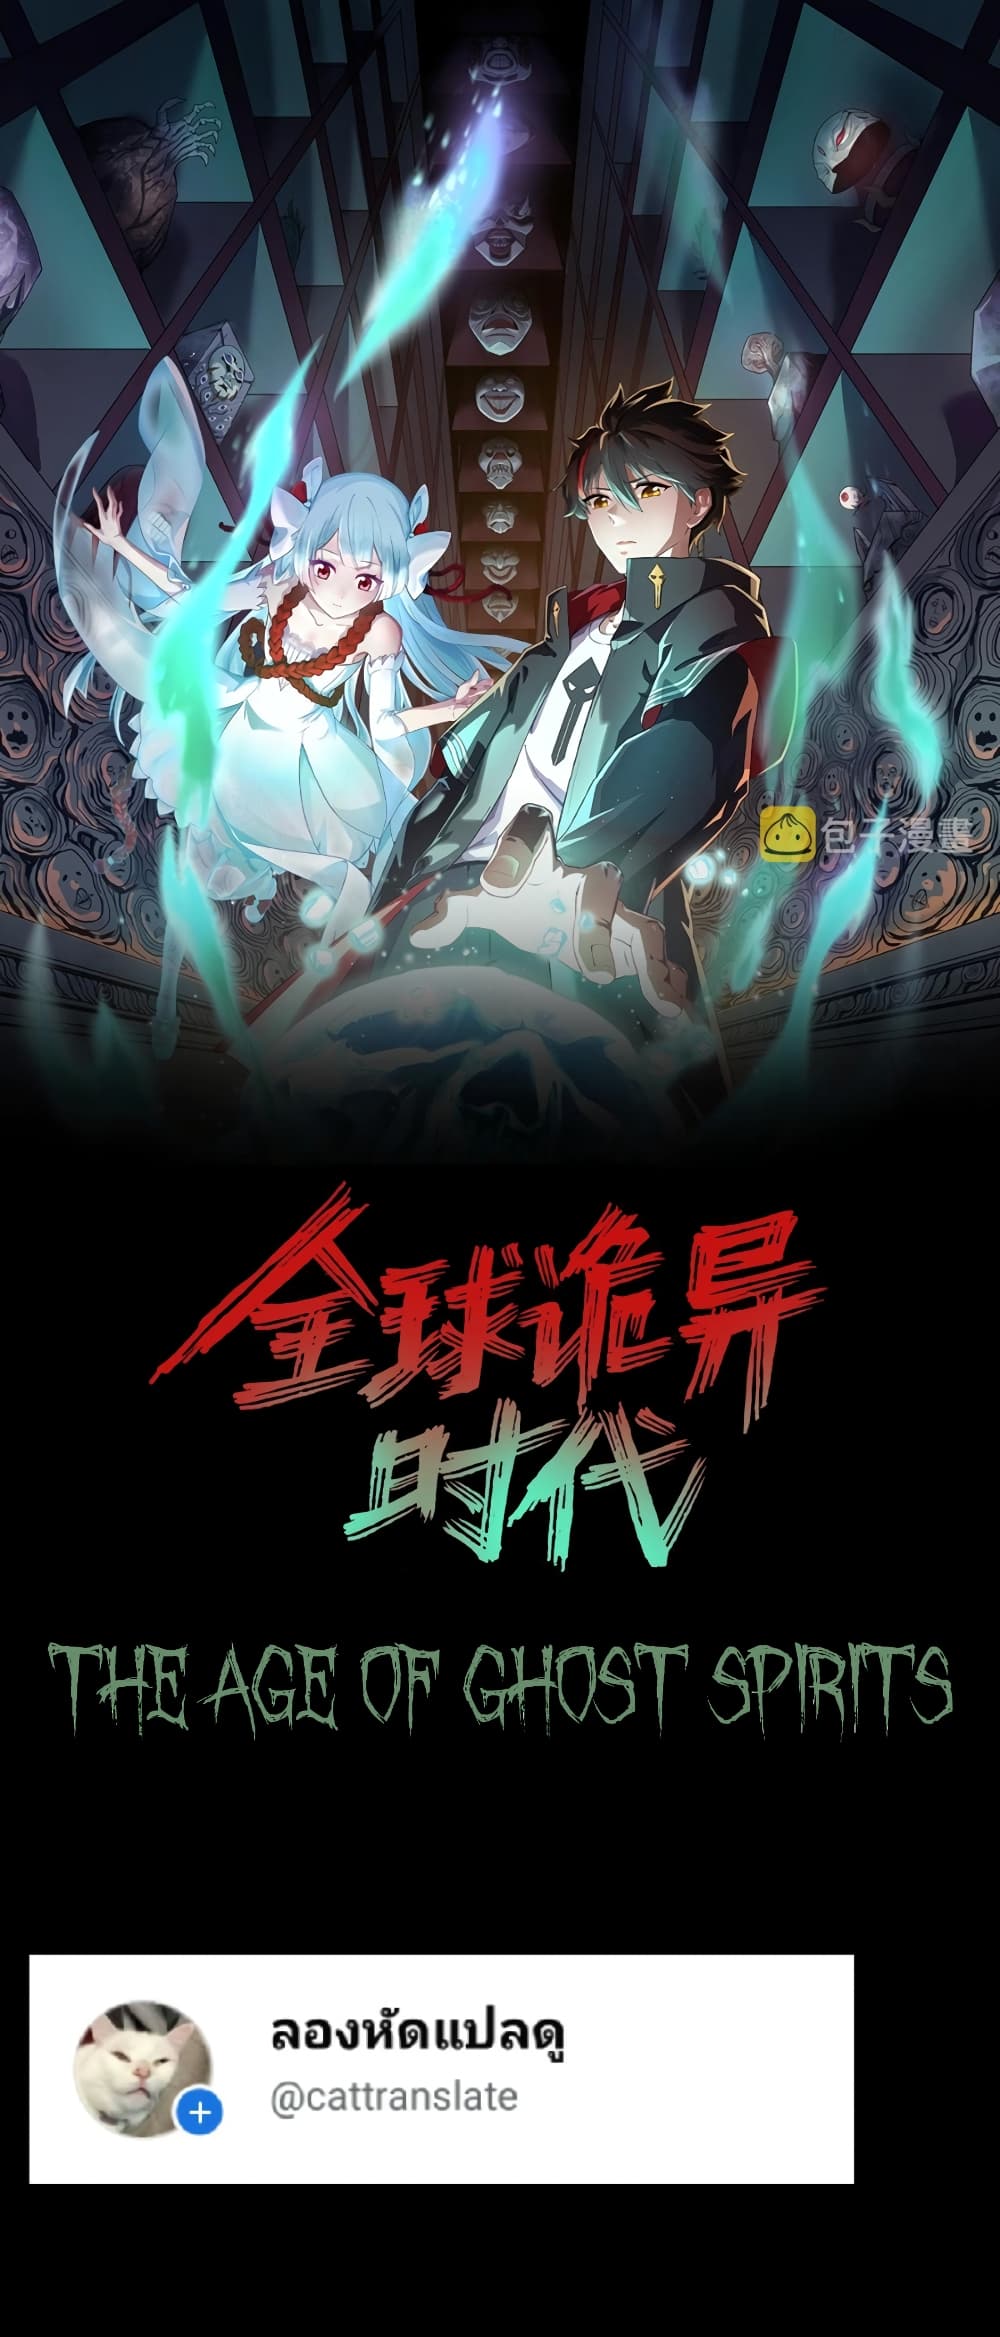 The Age of Ghost Spirits à¸à¸­à¸à¸à¸µà¹ 33 (1)